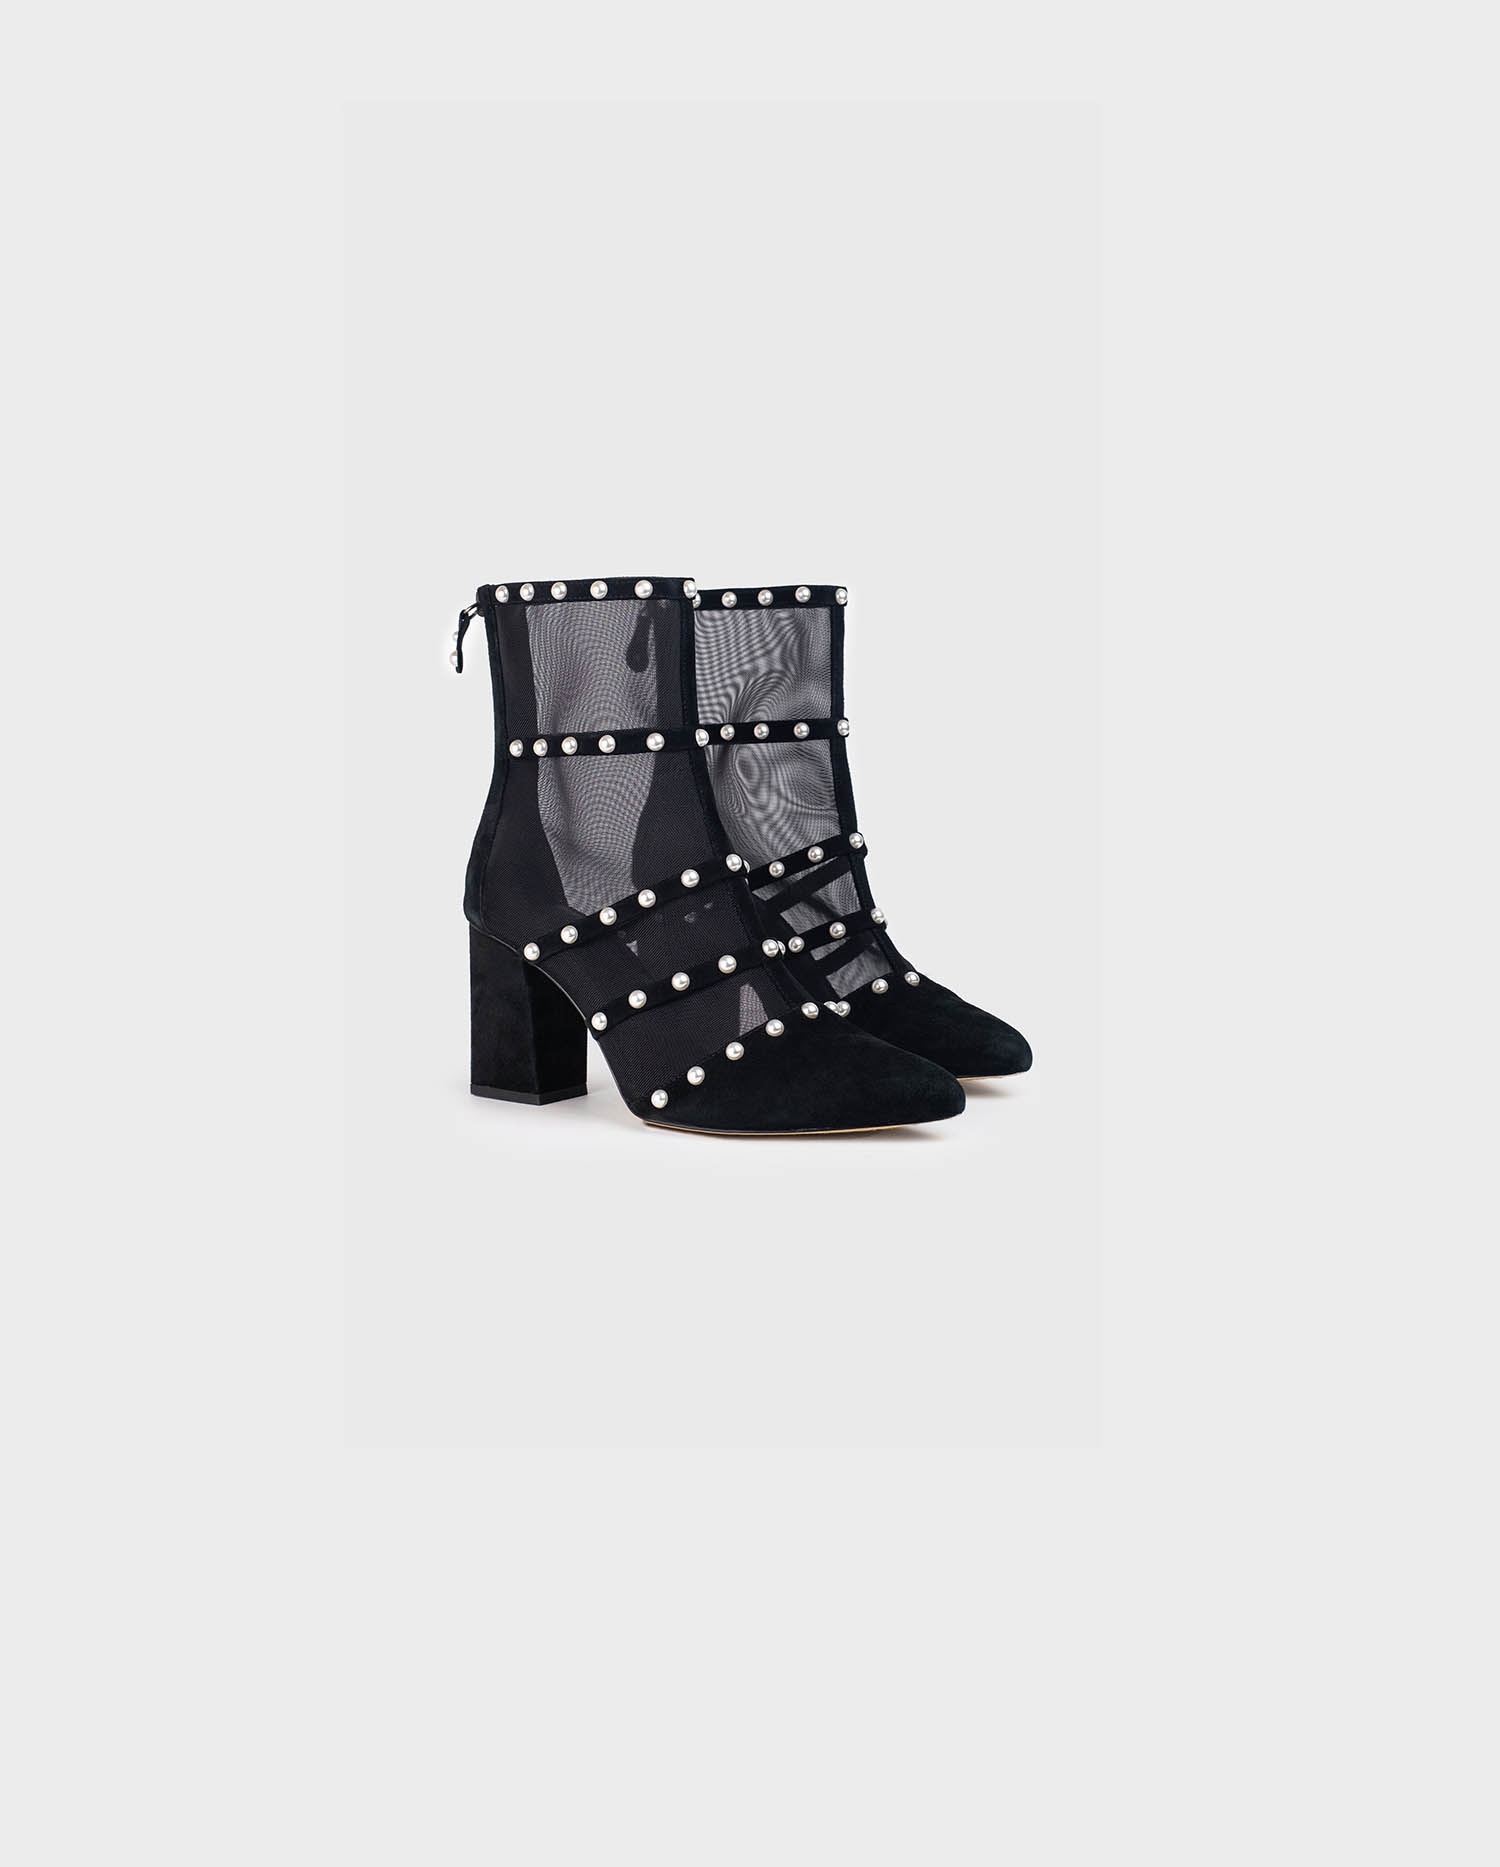 Shop the Black Decibel Sheer Mesh Boots With Block Heel from designer Anne Fontaine